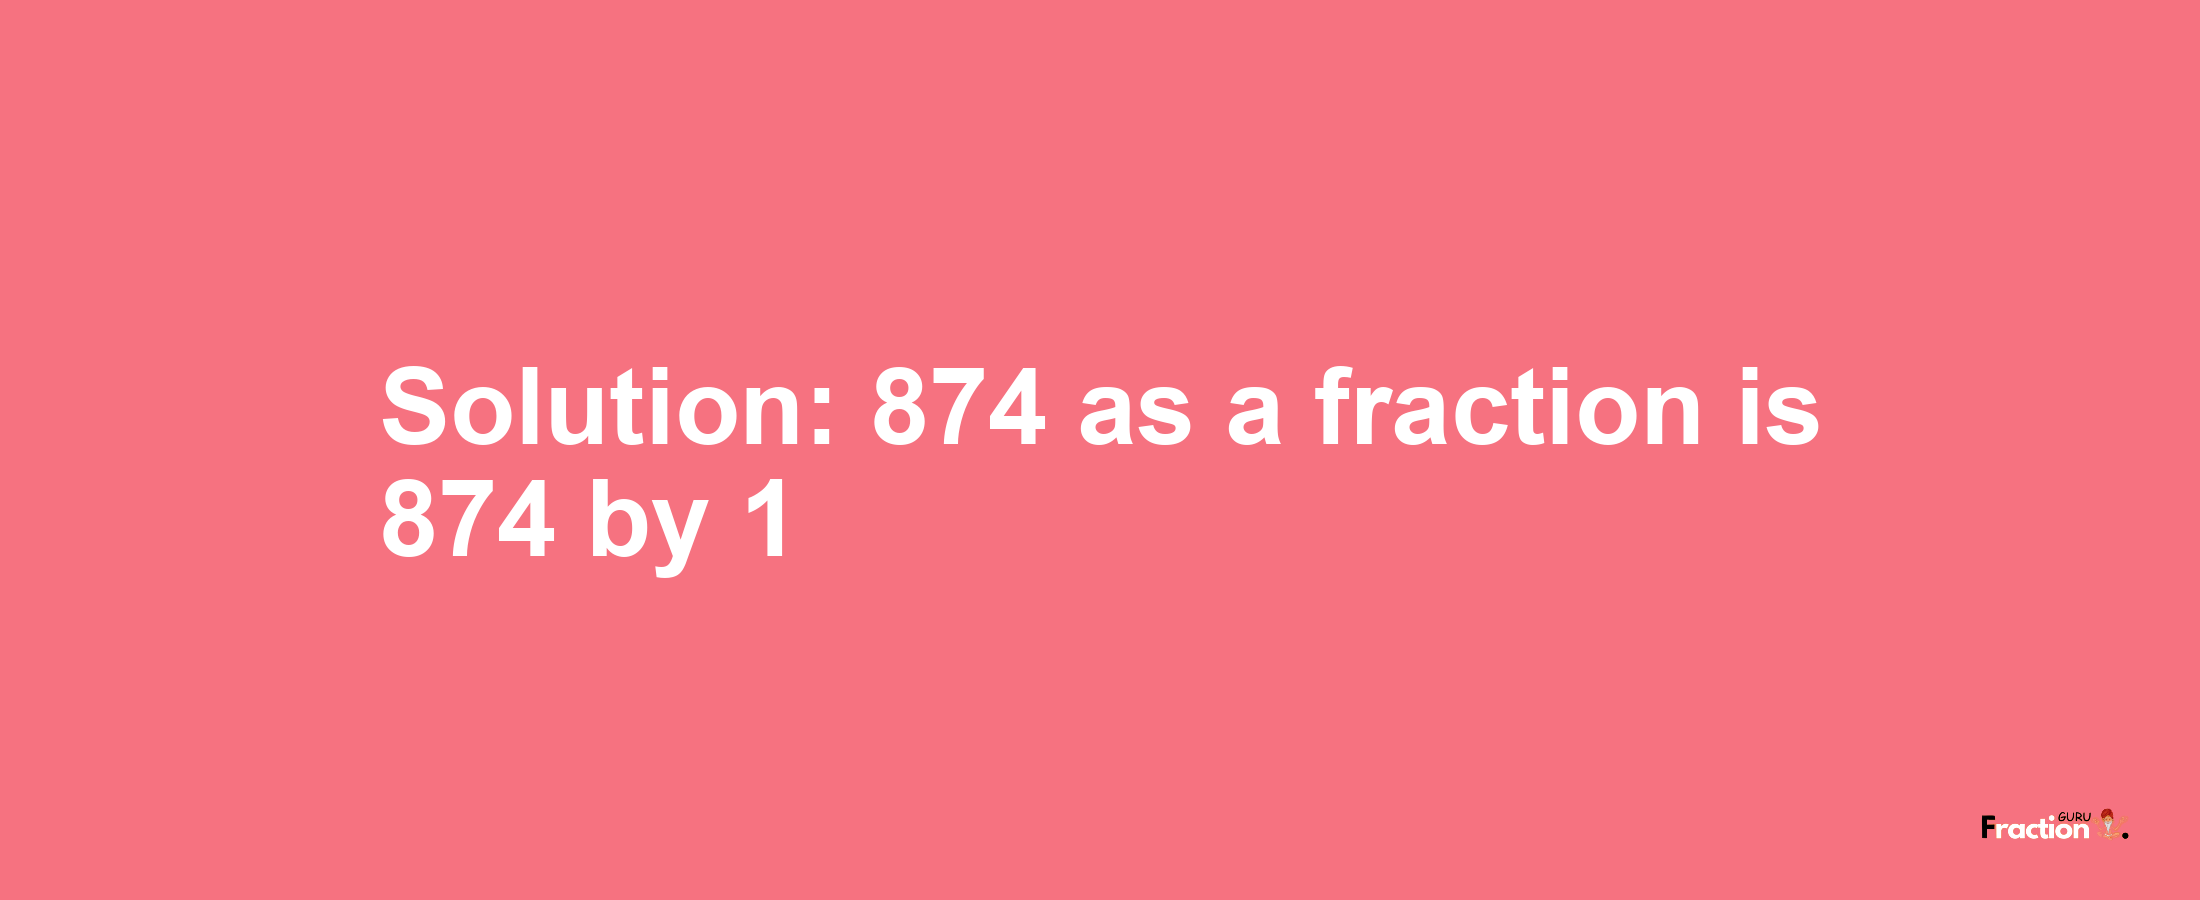 Solution:874 as a fraction is 874/1